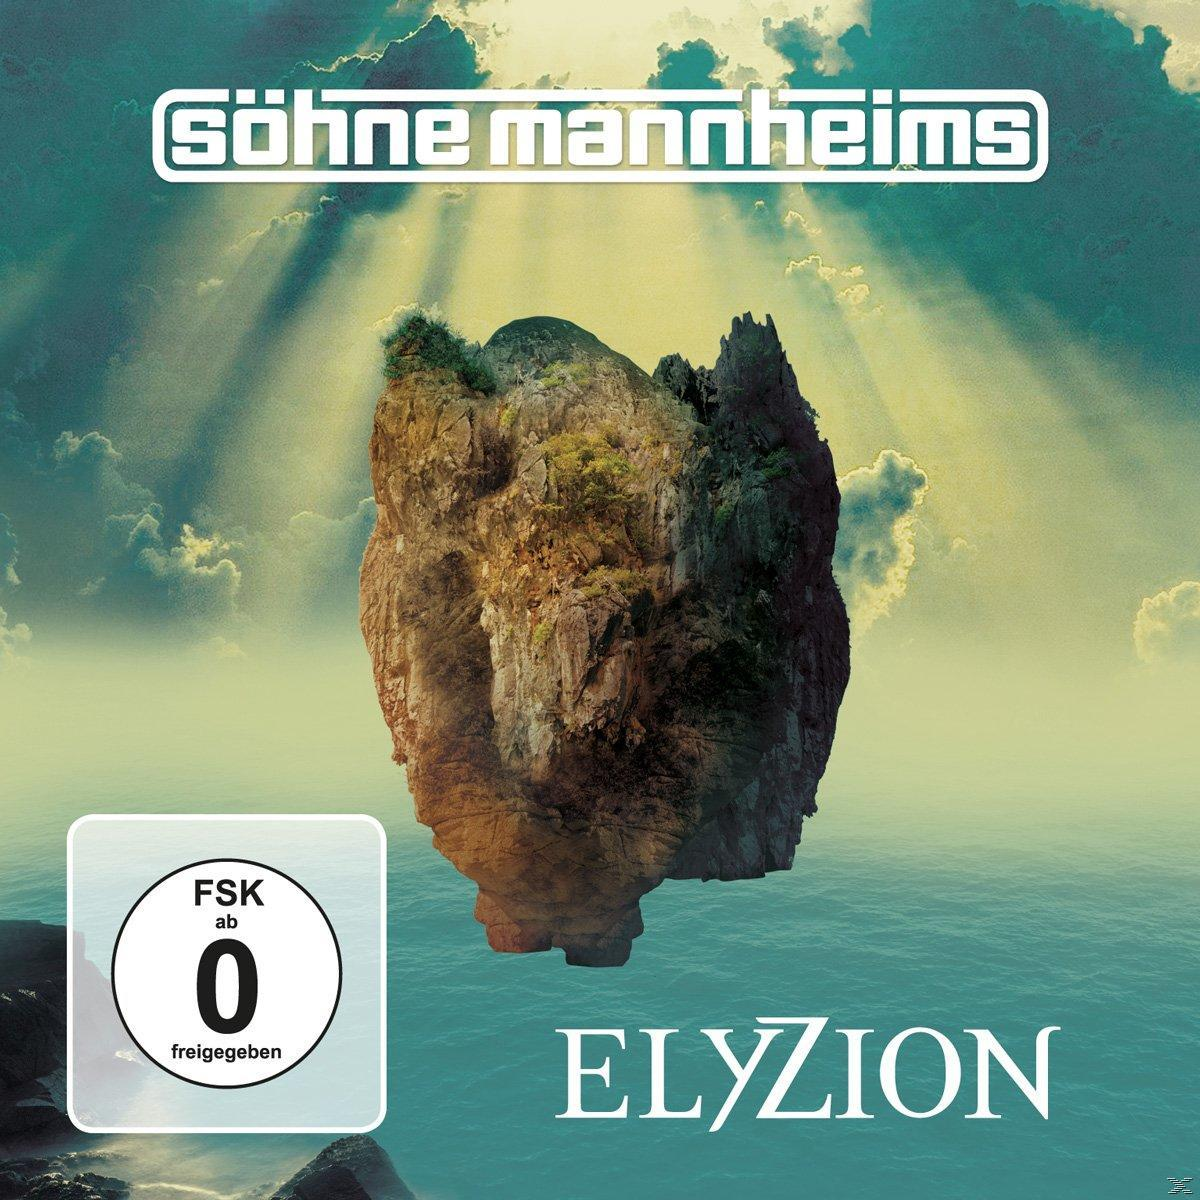 Söhne Mannheims - + Audio) Elyzion (Deluxe (CD - DVD Edition)